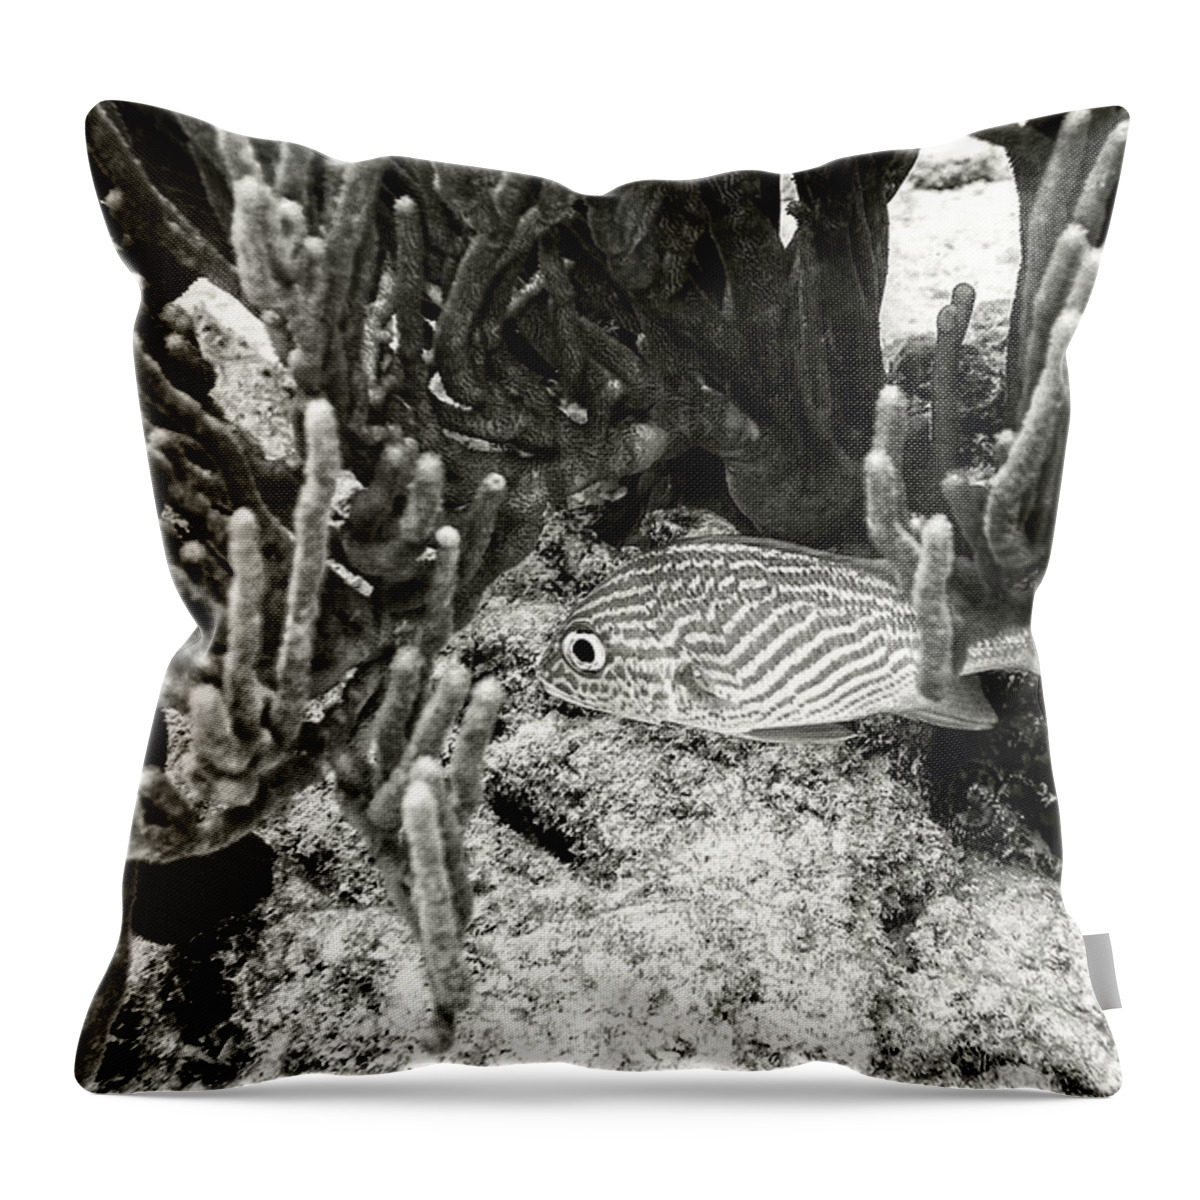 French Grunt Throw Pillow featuring the photograph French Grunt Under Corals by Perla Copernik